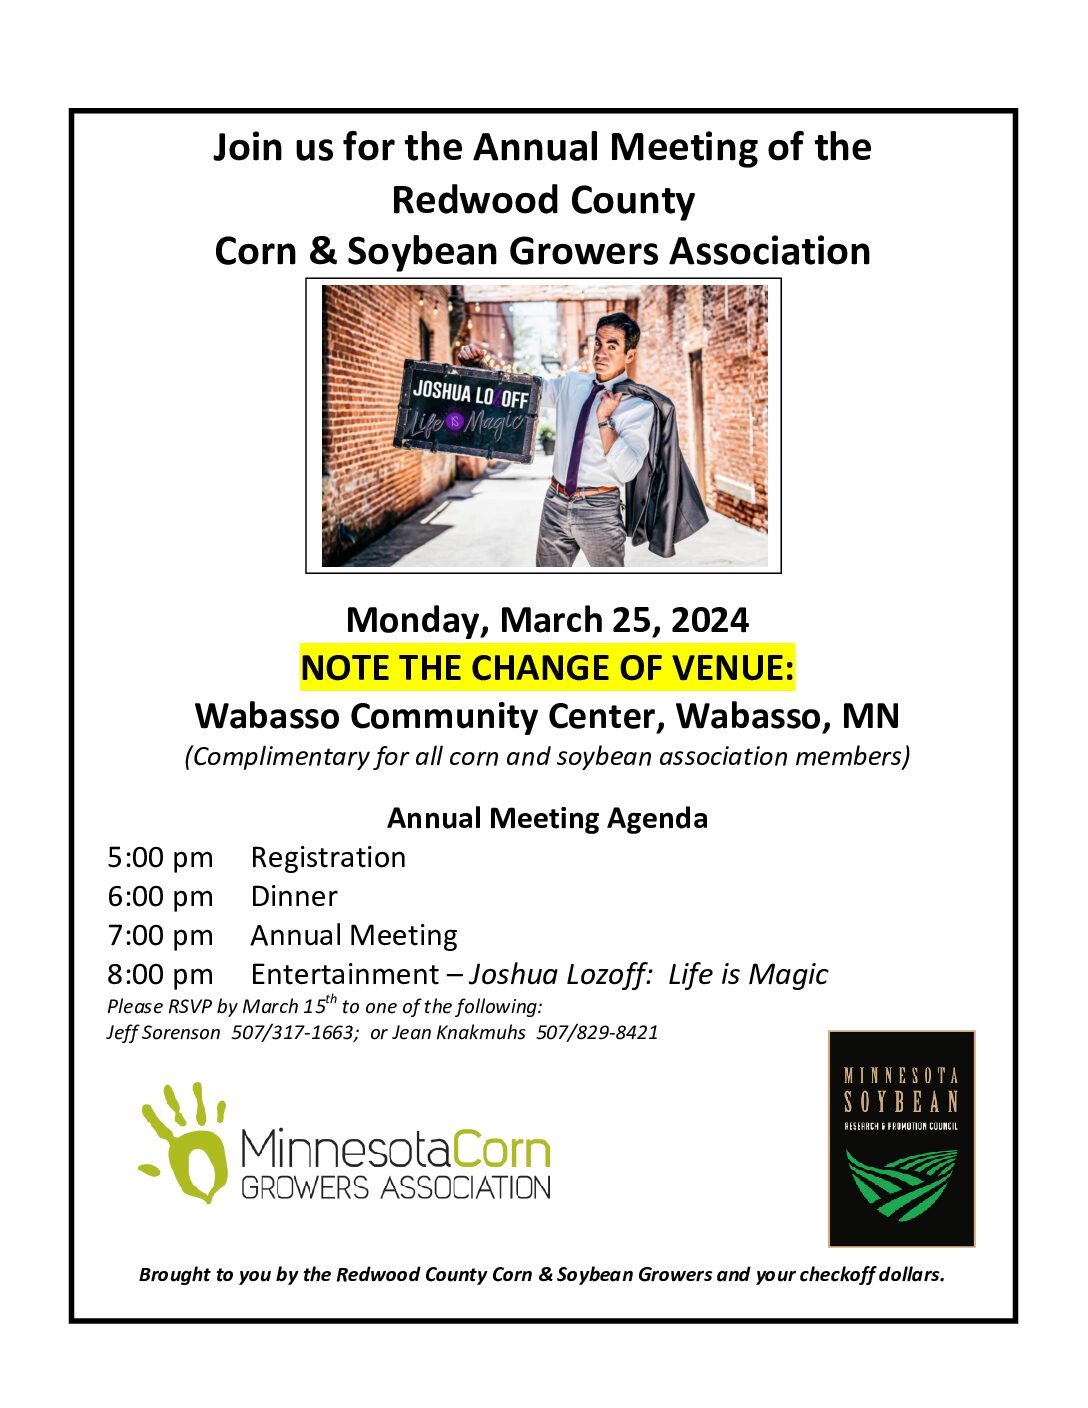 <h1 class="tribe-events-single-event-title">Redwood County Corn & Soybean Growers</h1>